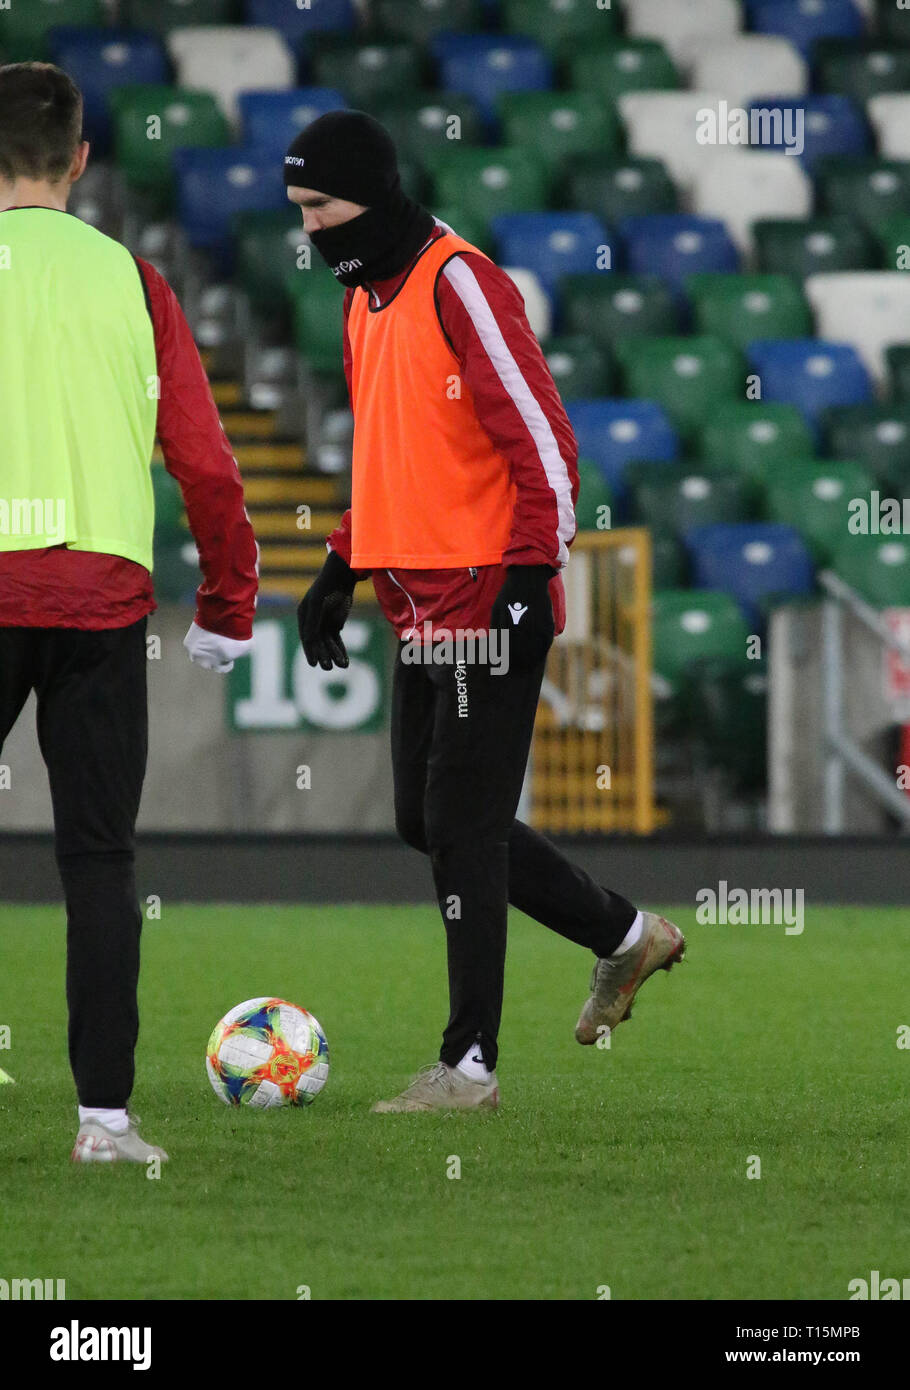 Windsor Park Belfast, Northern Ireland, UK. 23 March 2019. The Belarus squad train at Windsor Park before their game against Northern Ireland tomorrow night. Alexander Hleb training (hat and snood). Credit: David Hunter/Alamy Live News.. Stock Photo